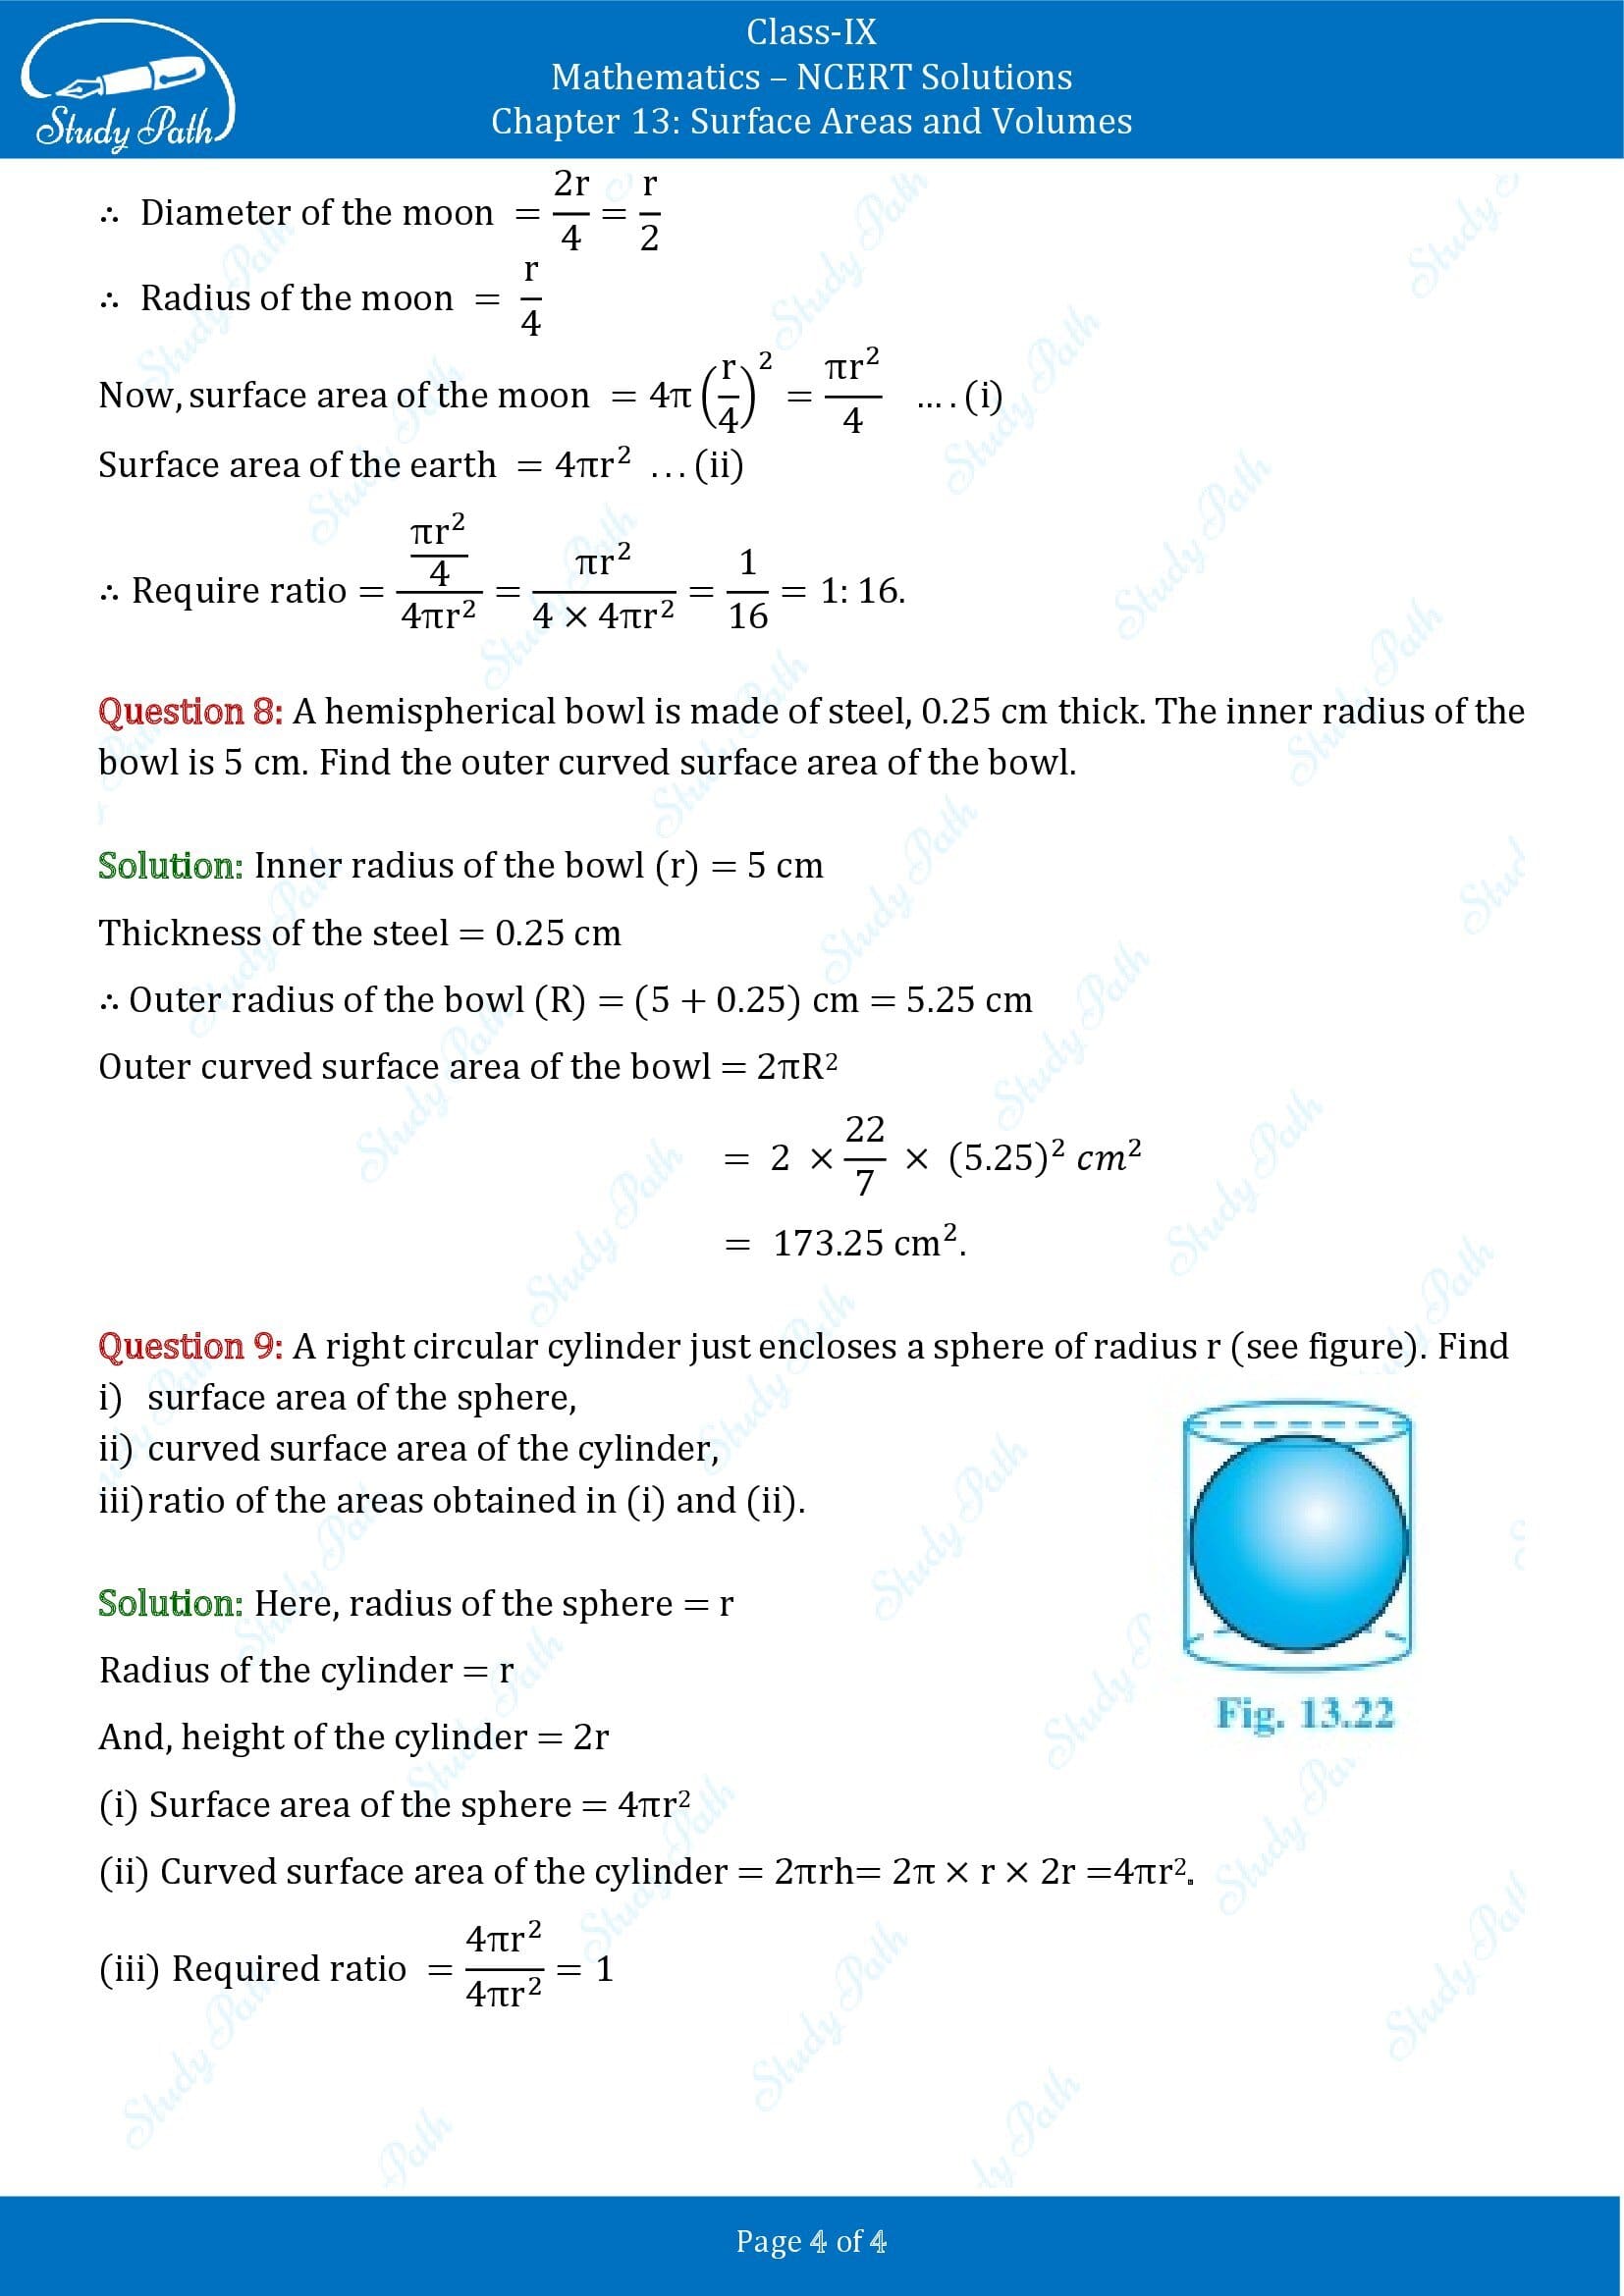 NCERT Solutions for Class 9 Maths Chapter 13 Surface Areas and Volumes Exercise 13.4 00004